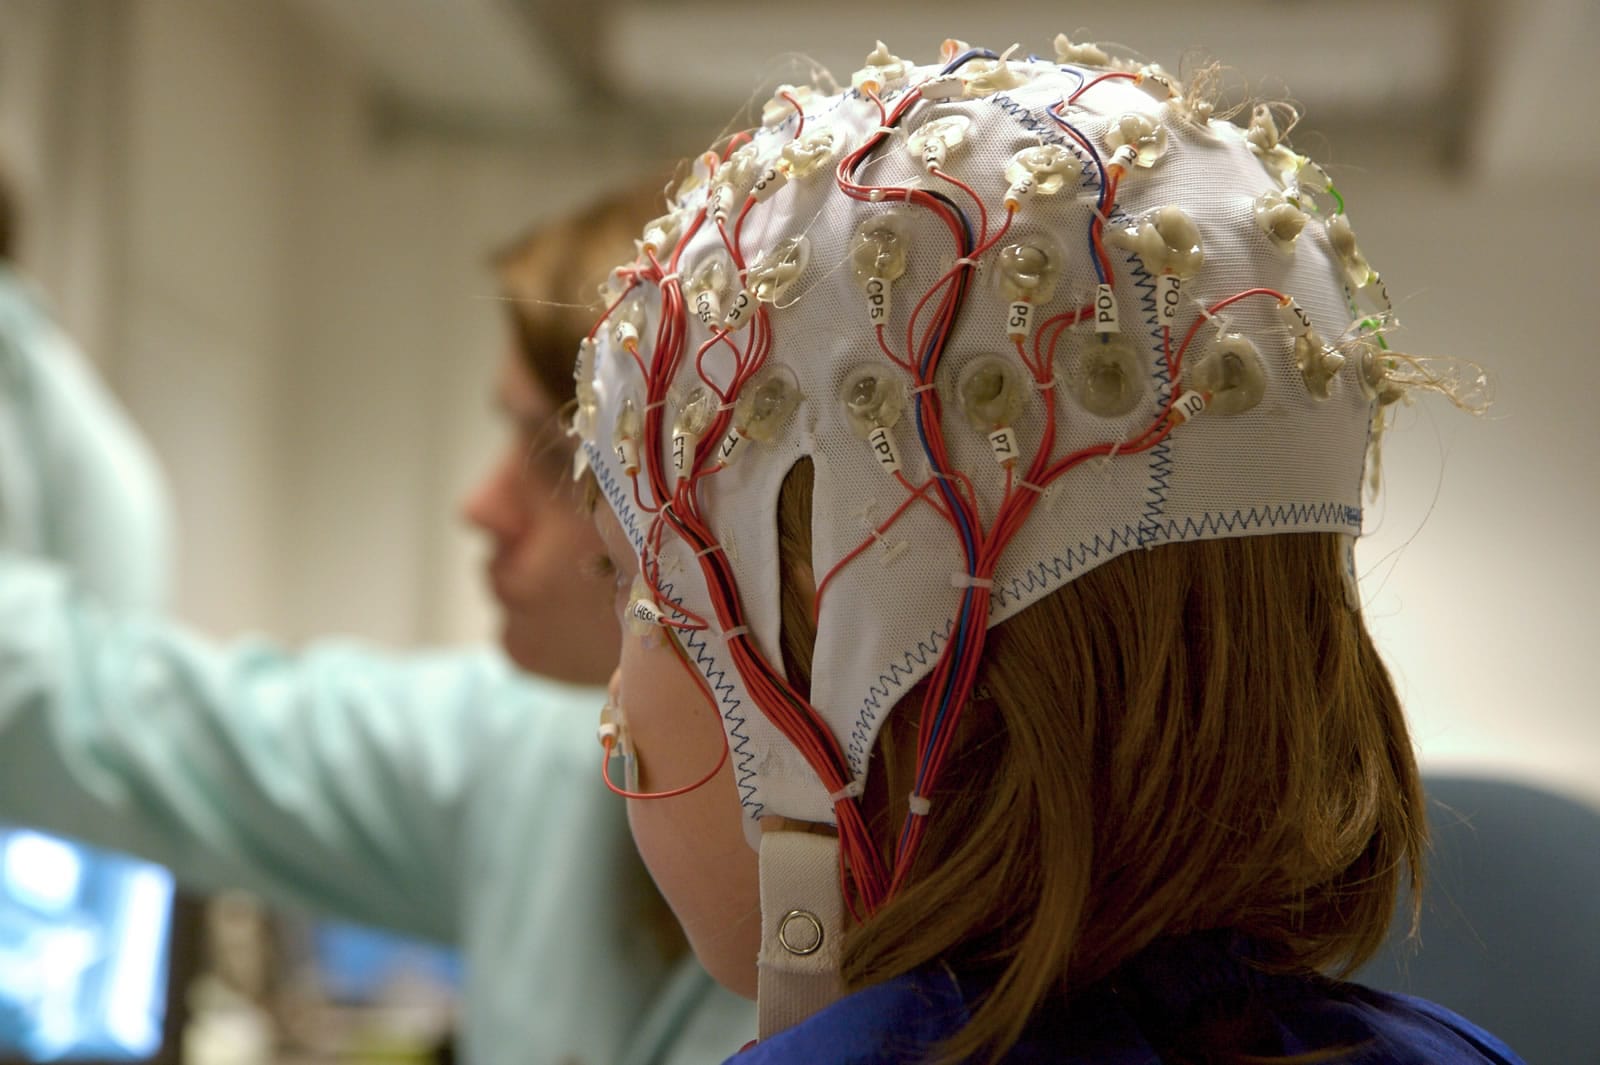 Research participant wearing brainwave monitoring cap with cables attached for neuroscience market research